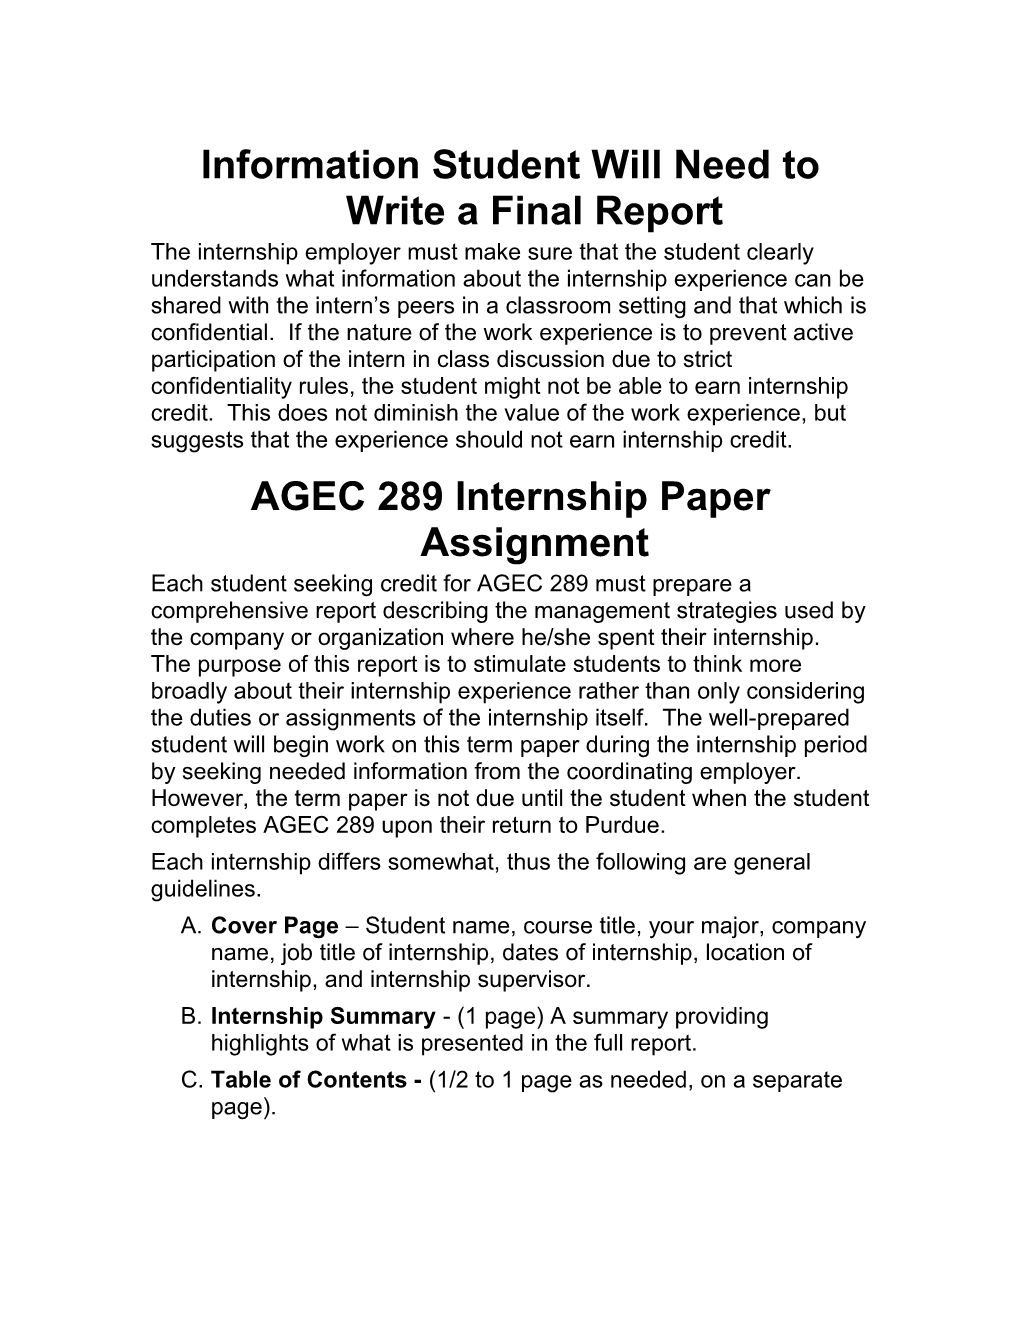 Student S Information Needs to Write a Final Report